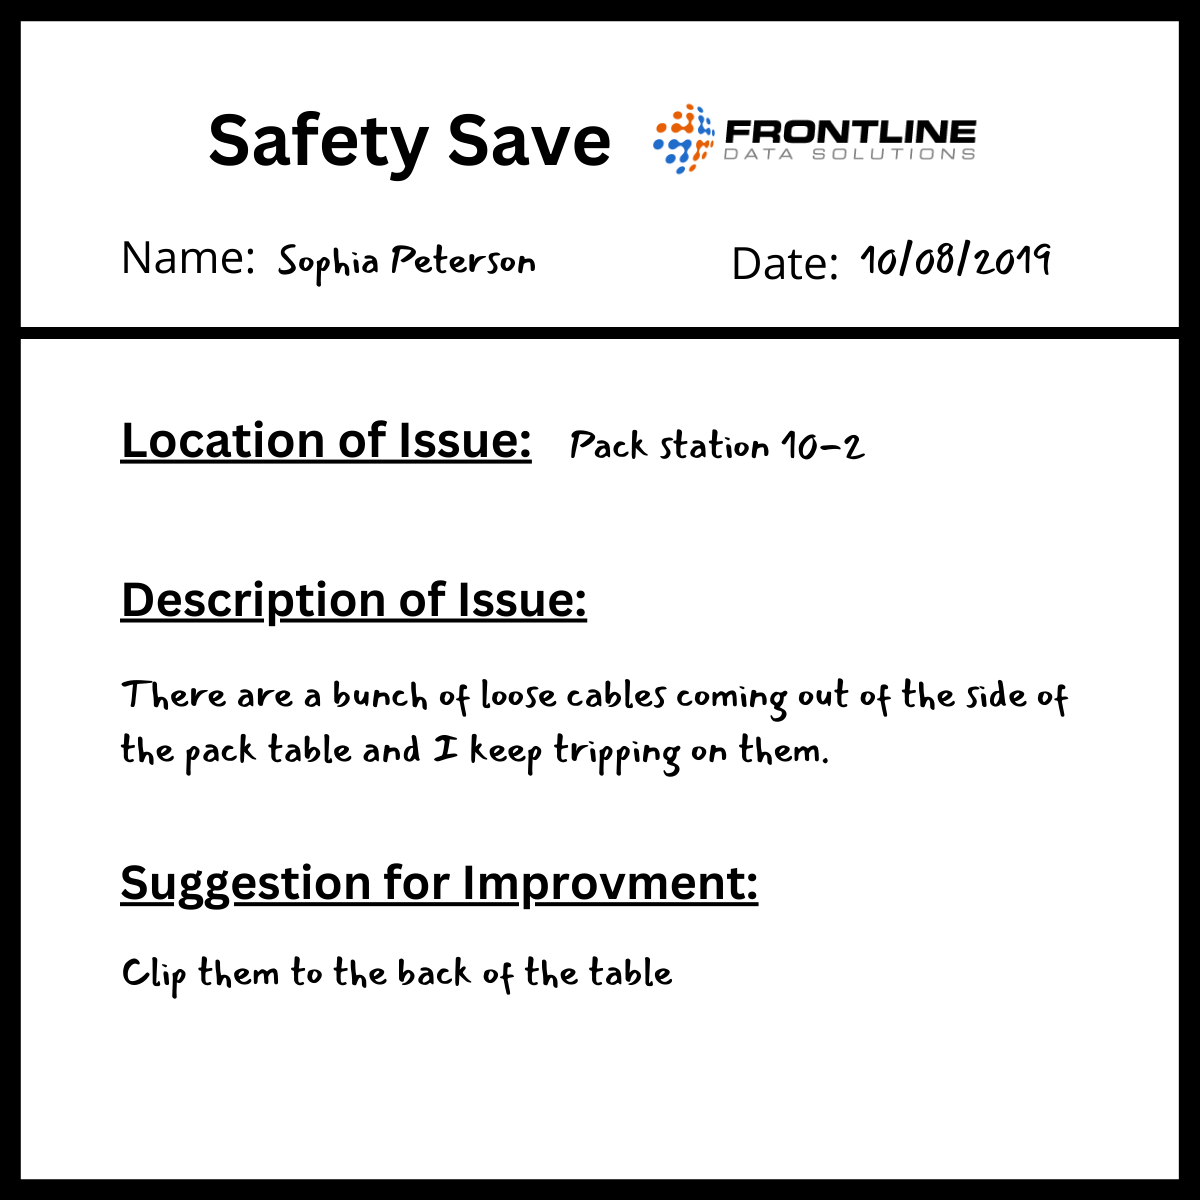 The image shows the title Safety Save at the top. Underneath is are the name and data fields, which are filled out with the name Sophia Peterson and the date October 8 2019. Underneath this are the three main categories. The first is location of issue with a handwritten note that says pack station 10 dash 2. The second line item is description of issue which reads there are a bunch of loose cables coming out of the side of the pack table and I keep tripping on them. Under that section is the suggestion for improvement line item. It reads clip them to the back of the table.